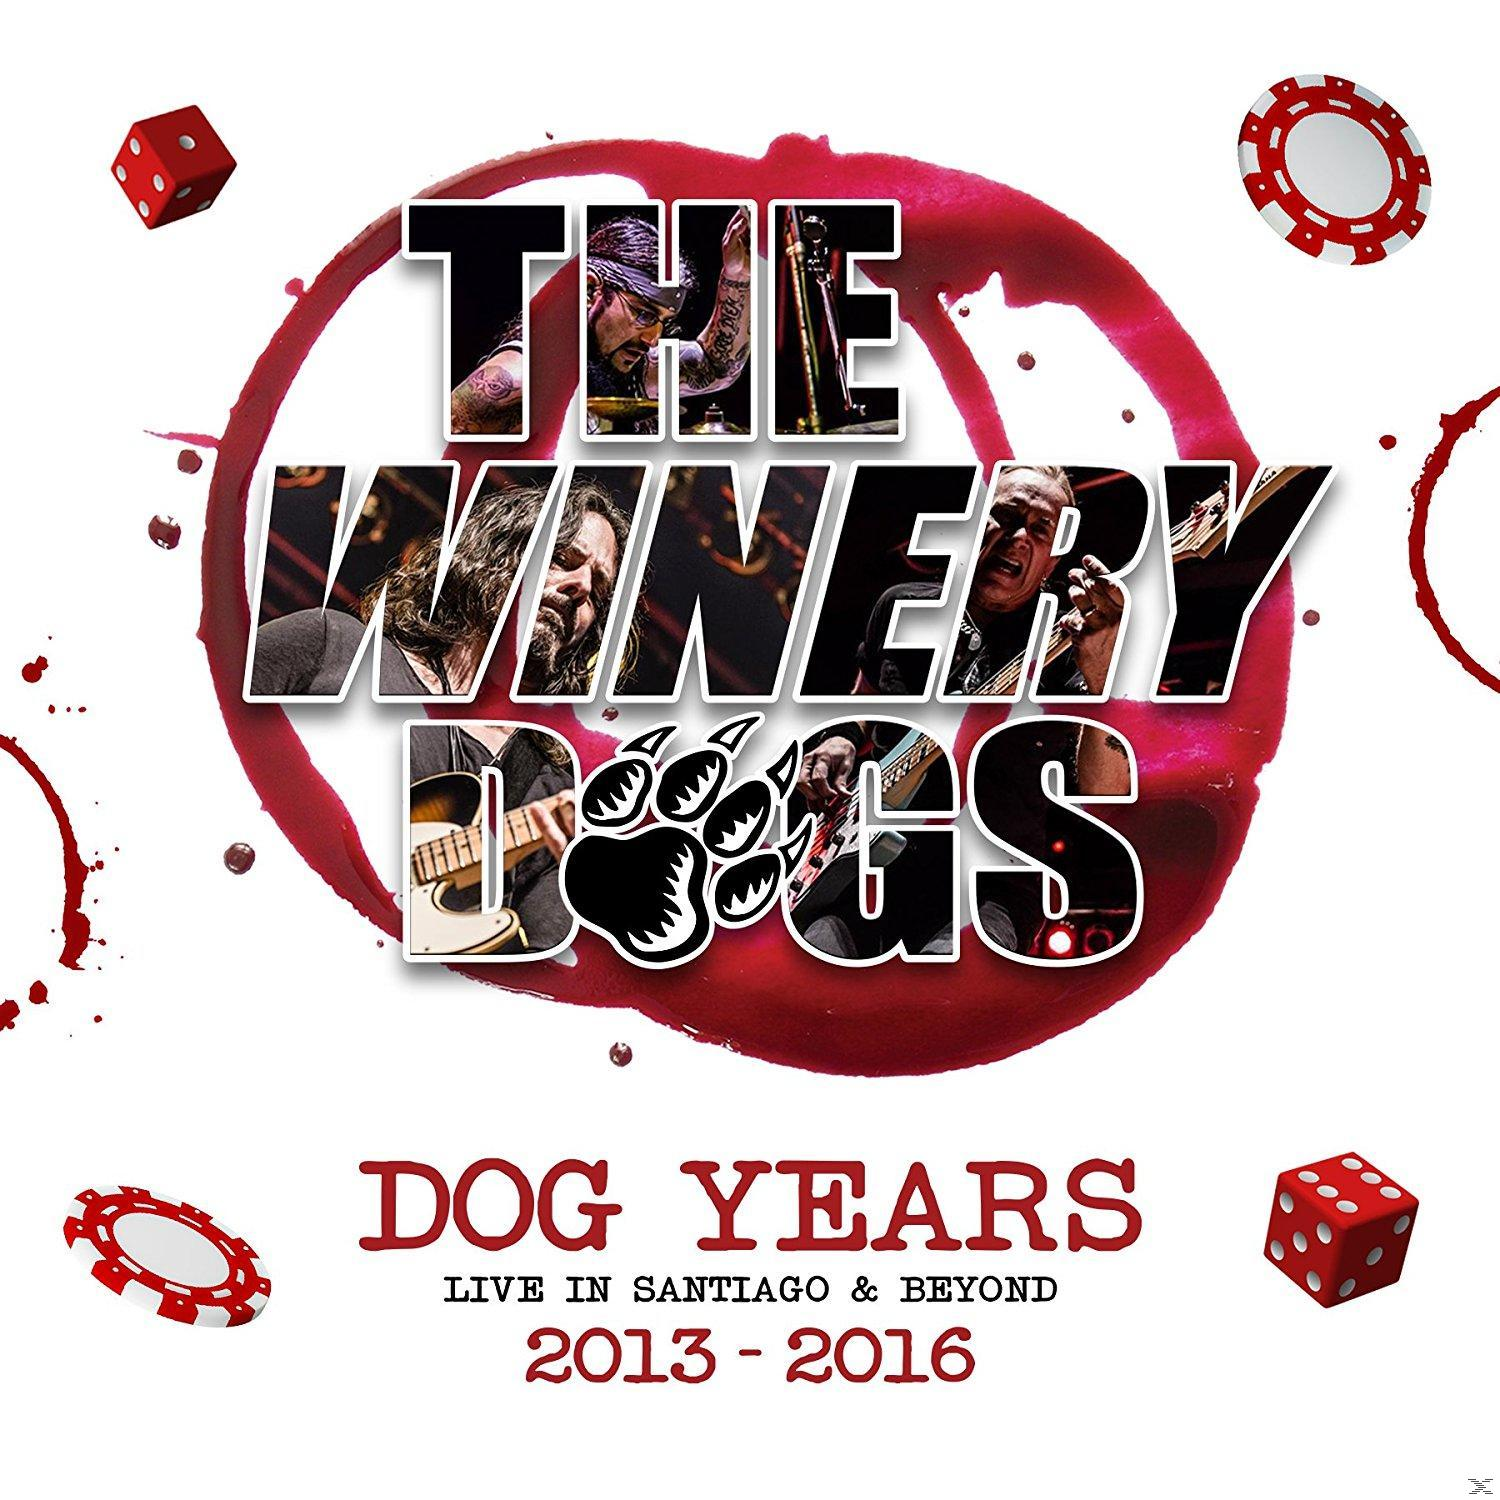 - - Live (Rec Santiago (Vinyl) YEARS 2013-2016 The Dogs Winery Beyond In DOG &